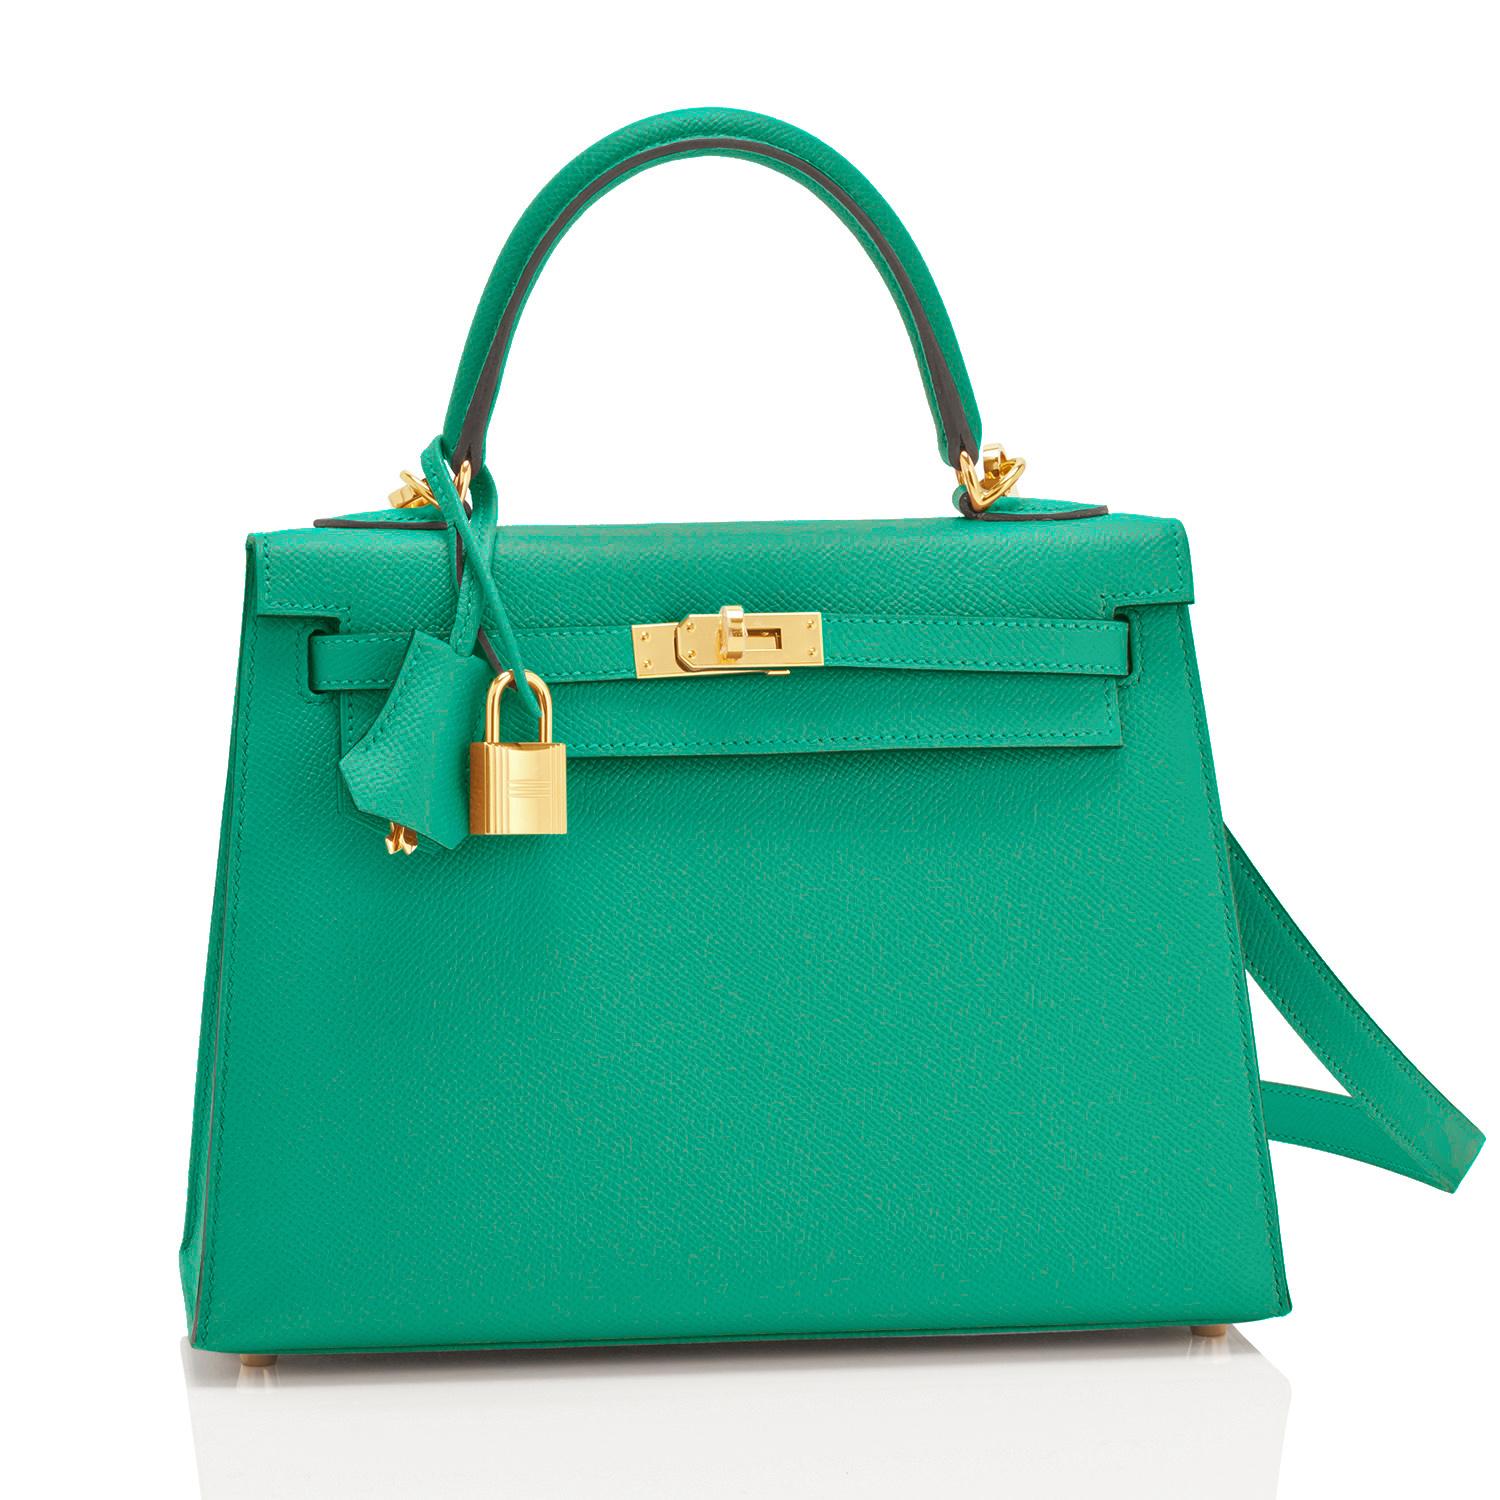 Hermes Kelly 25 Vert Jade Epsom Gold Sellier Green Shoulder Bag Z Stamp, 2021 RARE
Absolutely and stunningly gorgeous! Must see in person!
Just purchased from Hermes store. Bag bears new interior 2021 Z stamp.
Brand New in Box. Store Fresh. Pristine